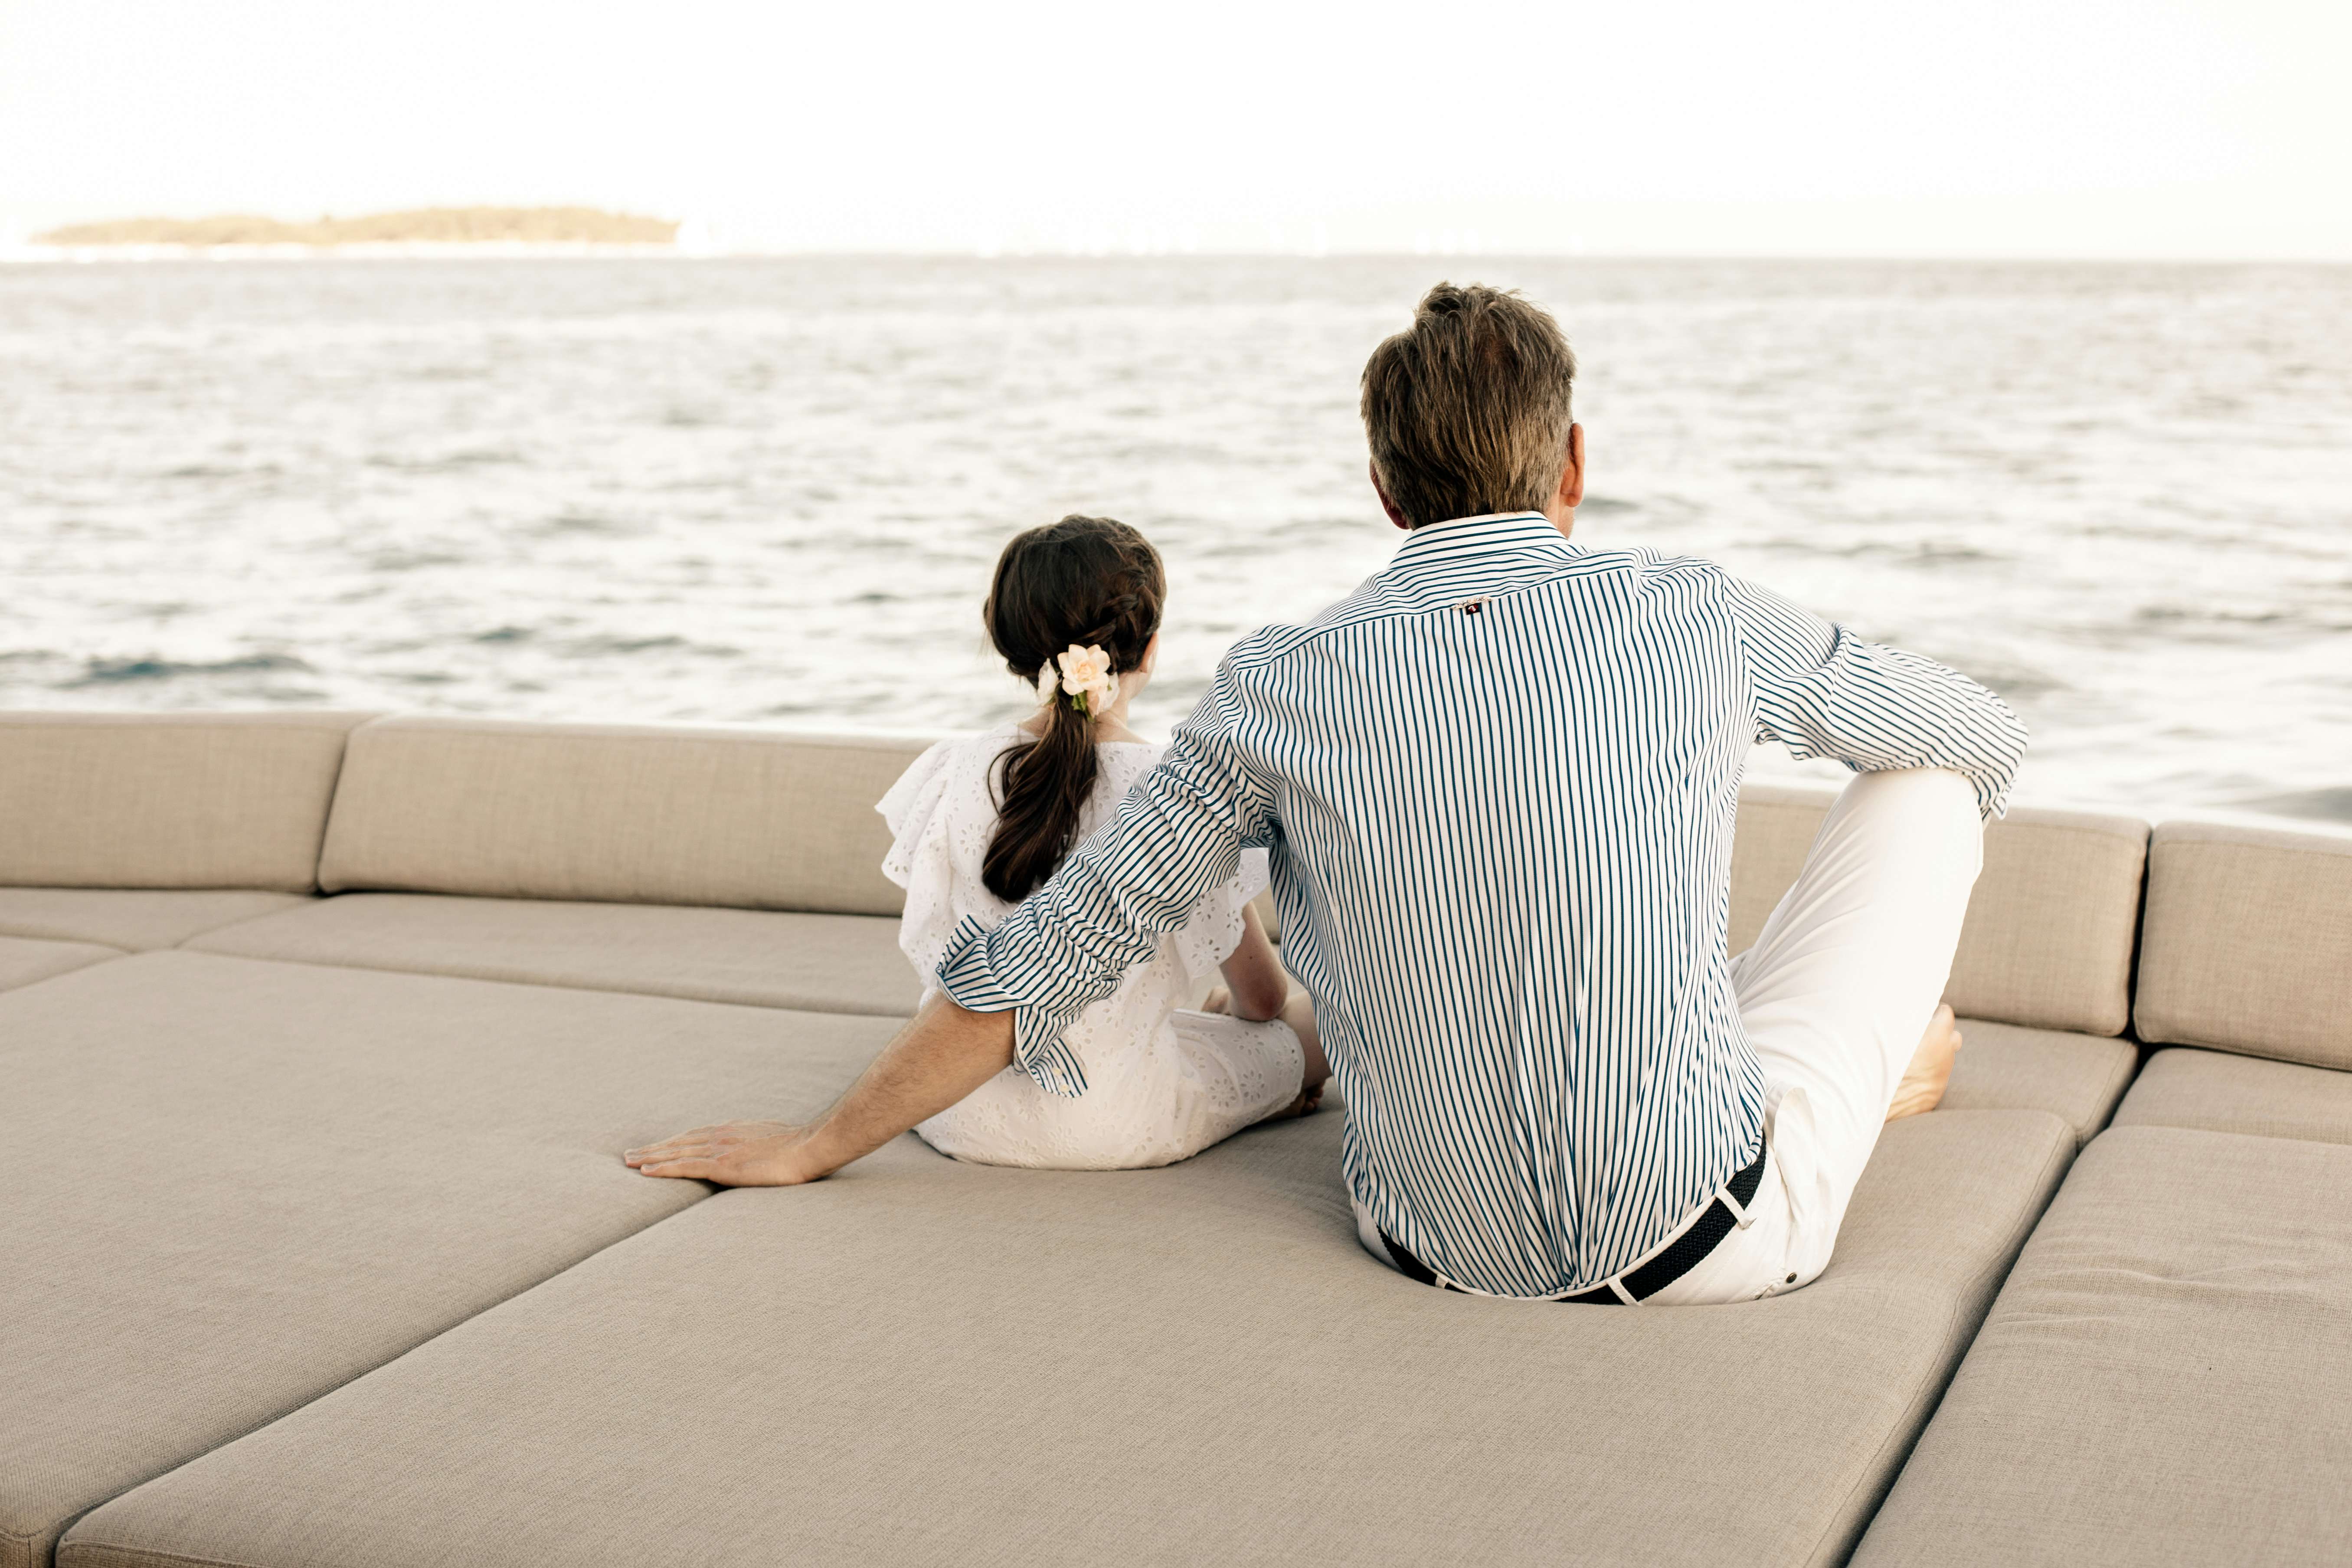 Father and daughter sitting on sun pads on board a luxury yacht looking at the horizon